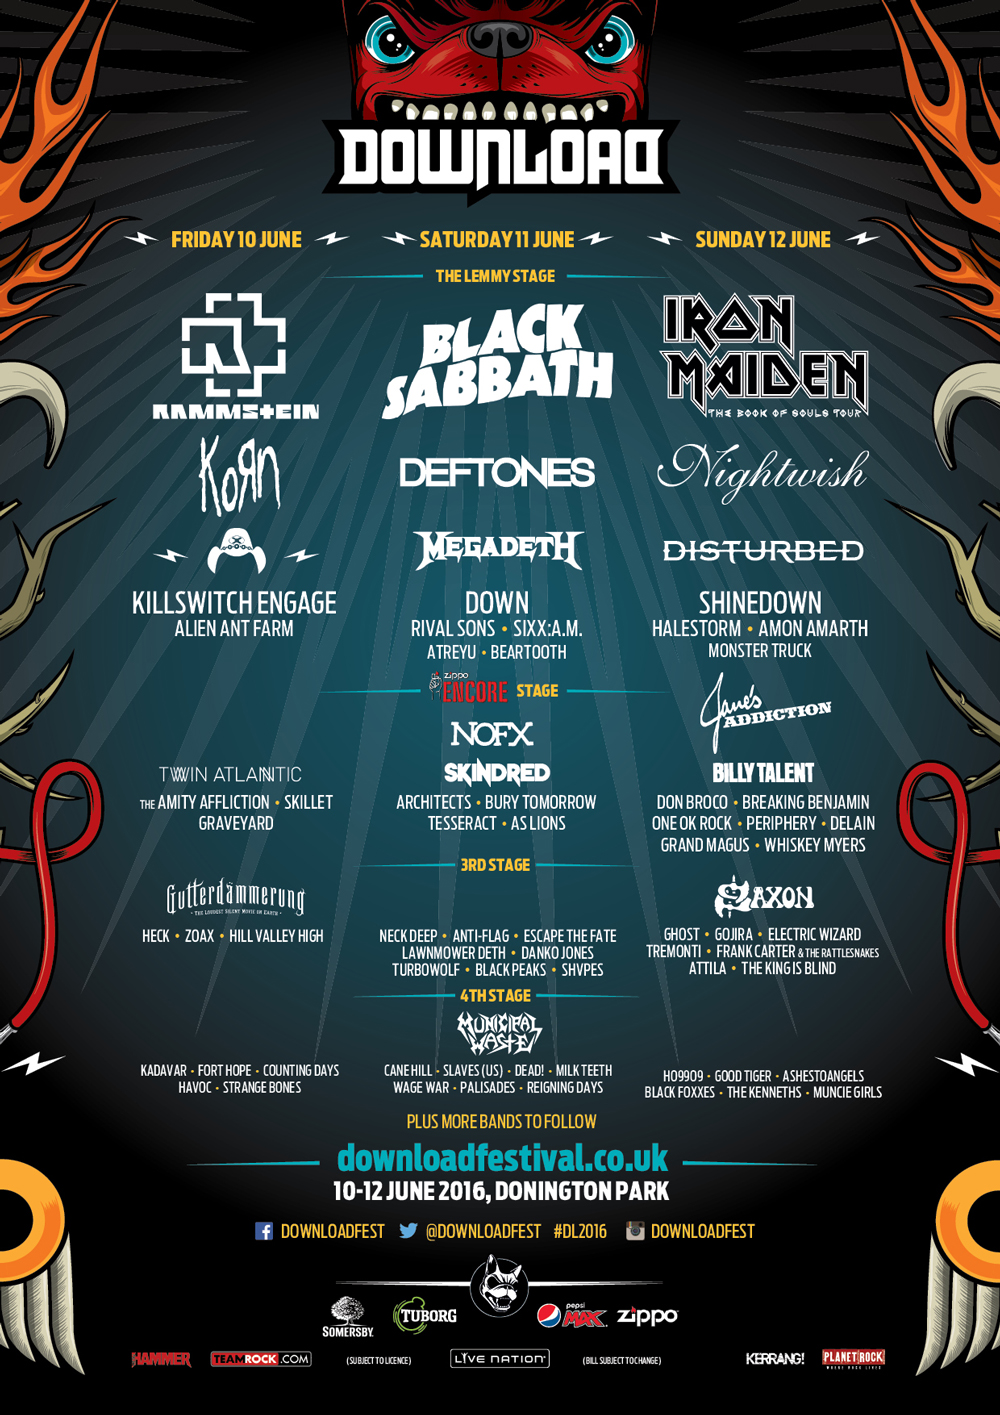 Download Festival 2016 Adds More New Names